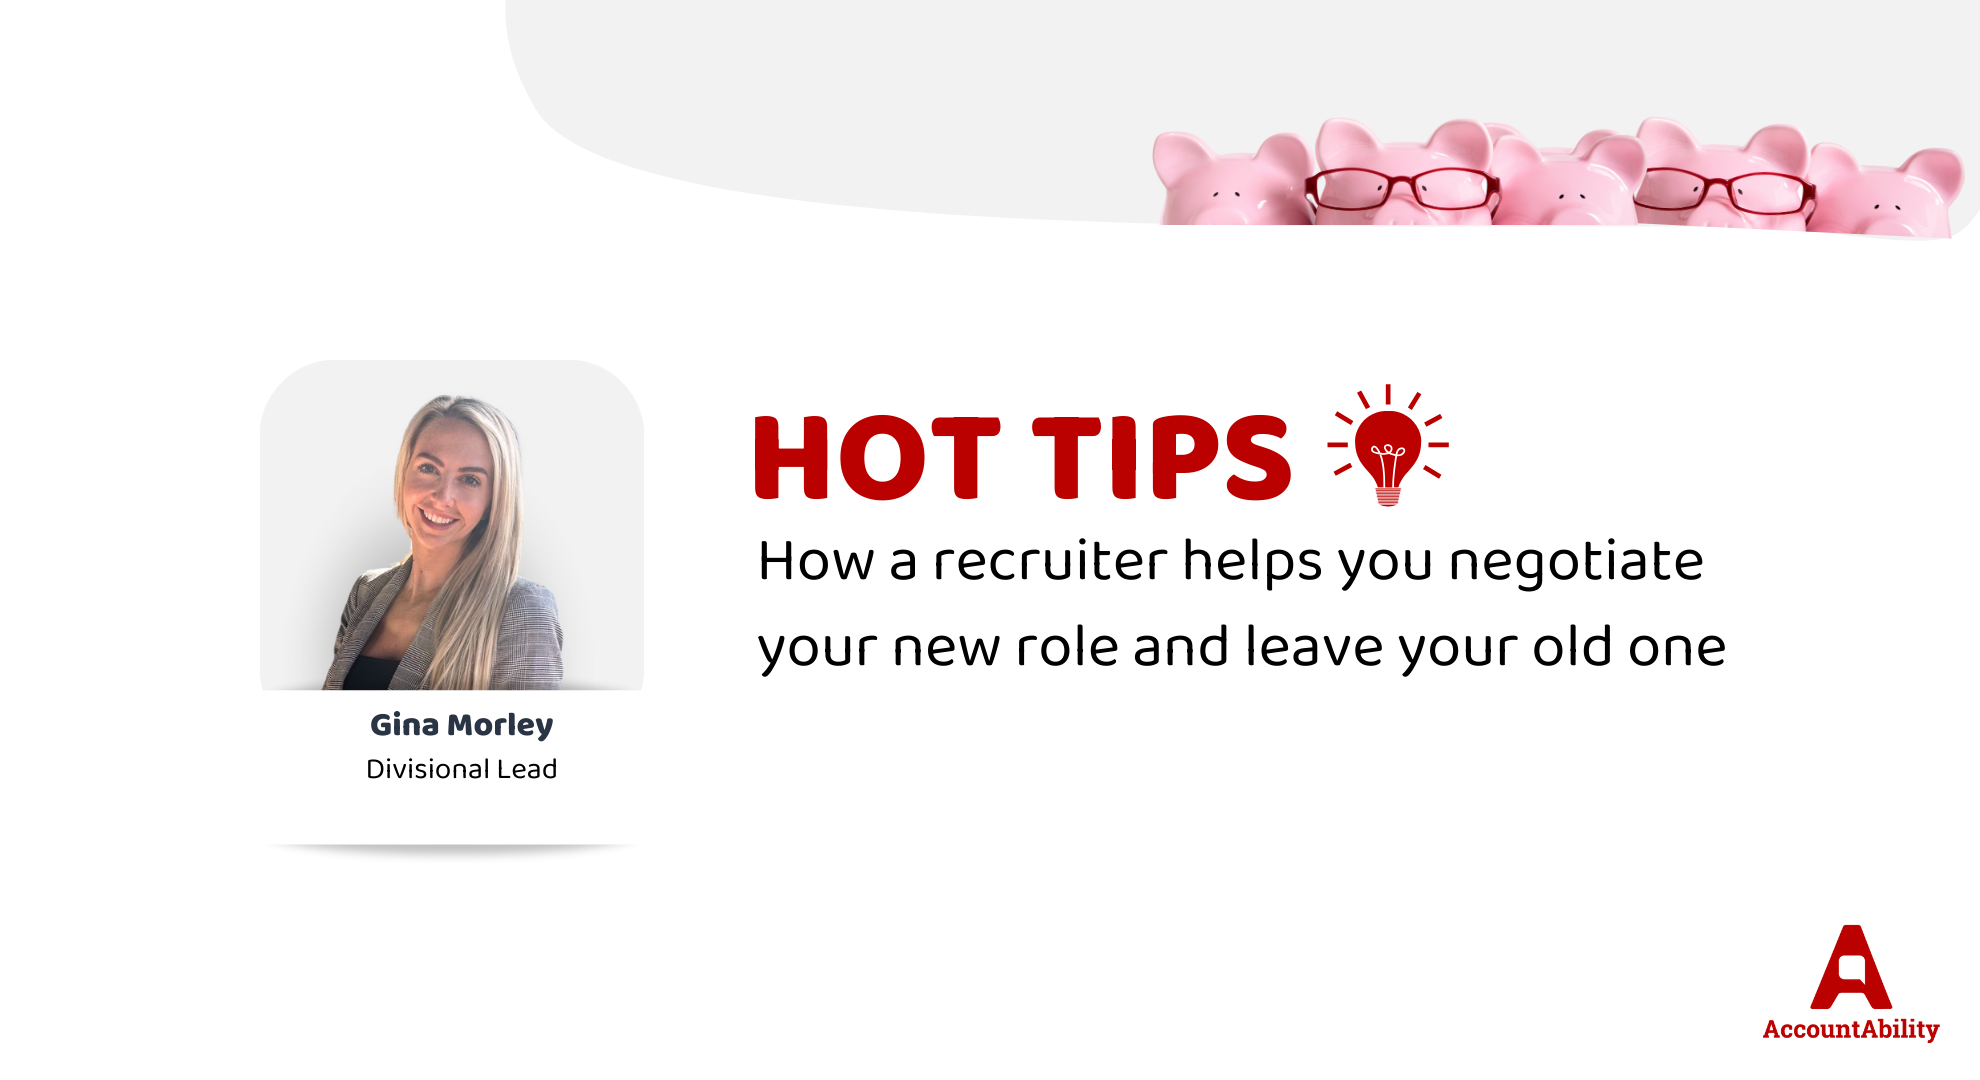  How a recruiter helps you negotiate your new role and leave your old one